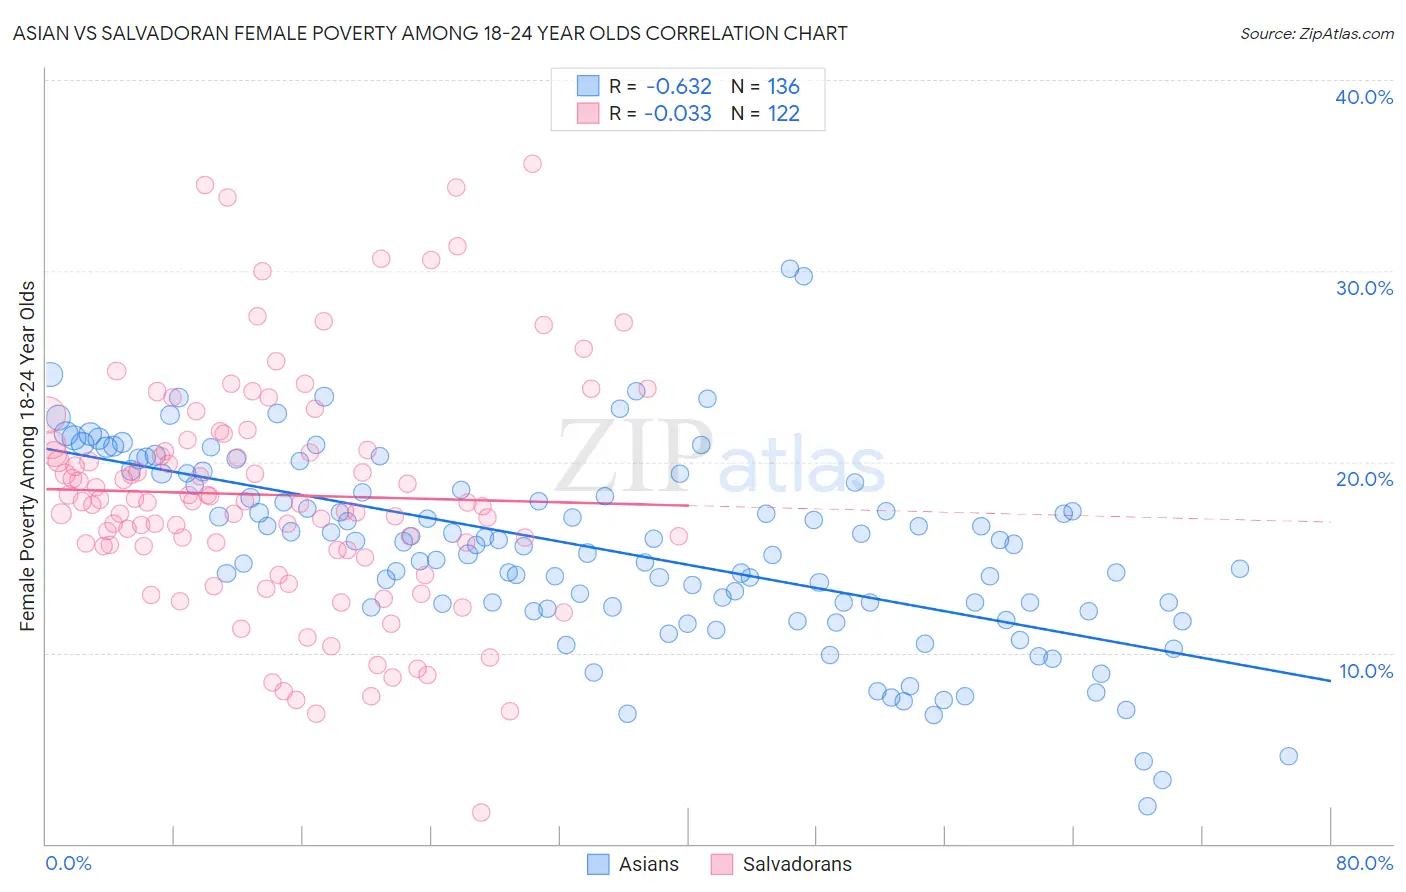 Asian vs Salvadoran Female Poverty Among 18-24 Year Olds